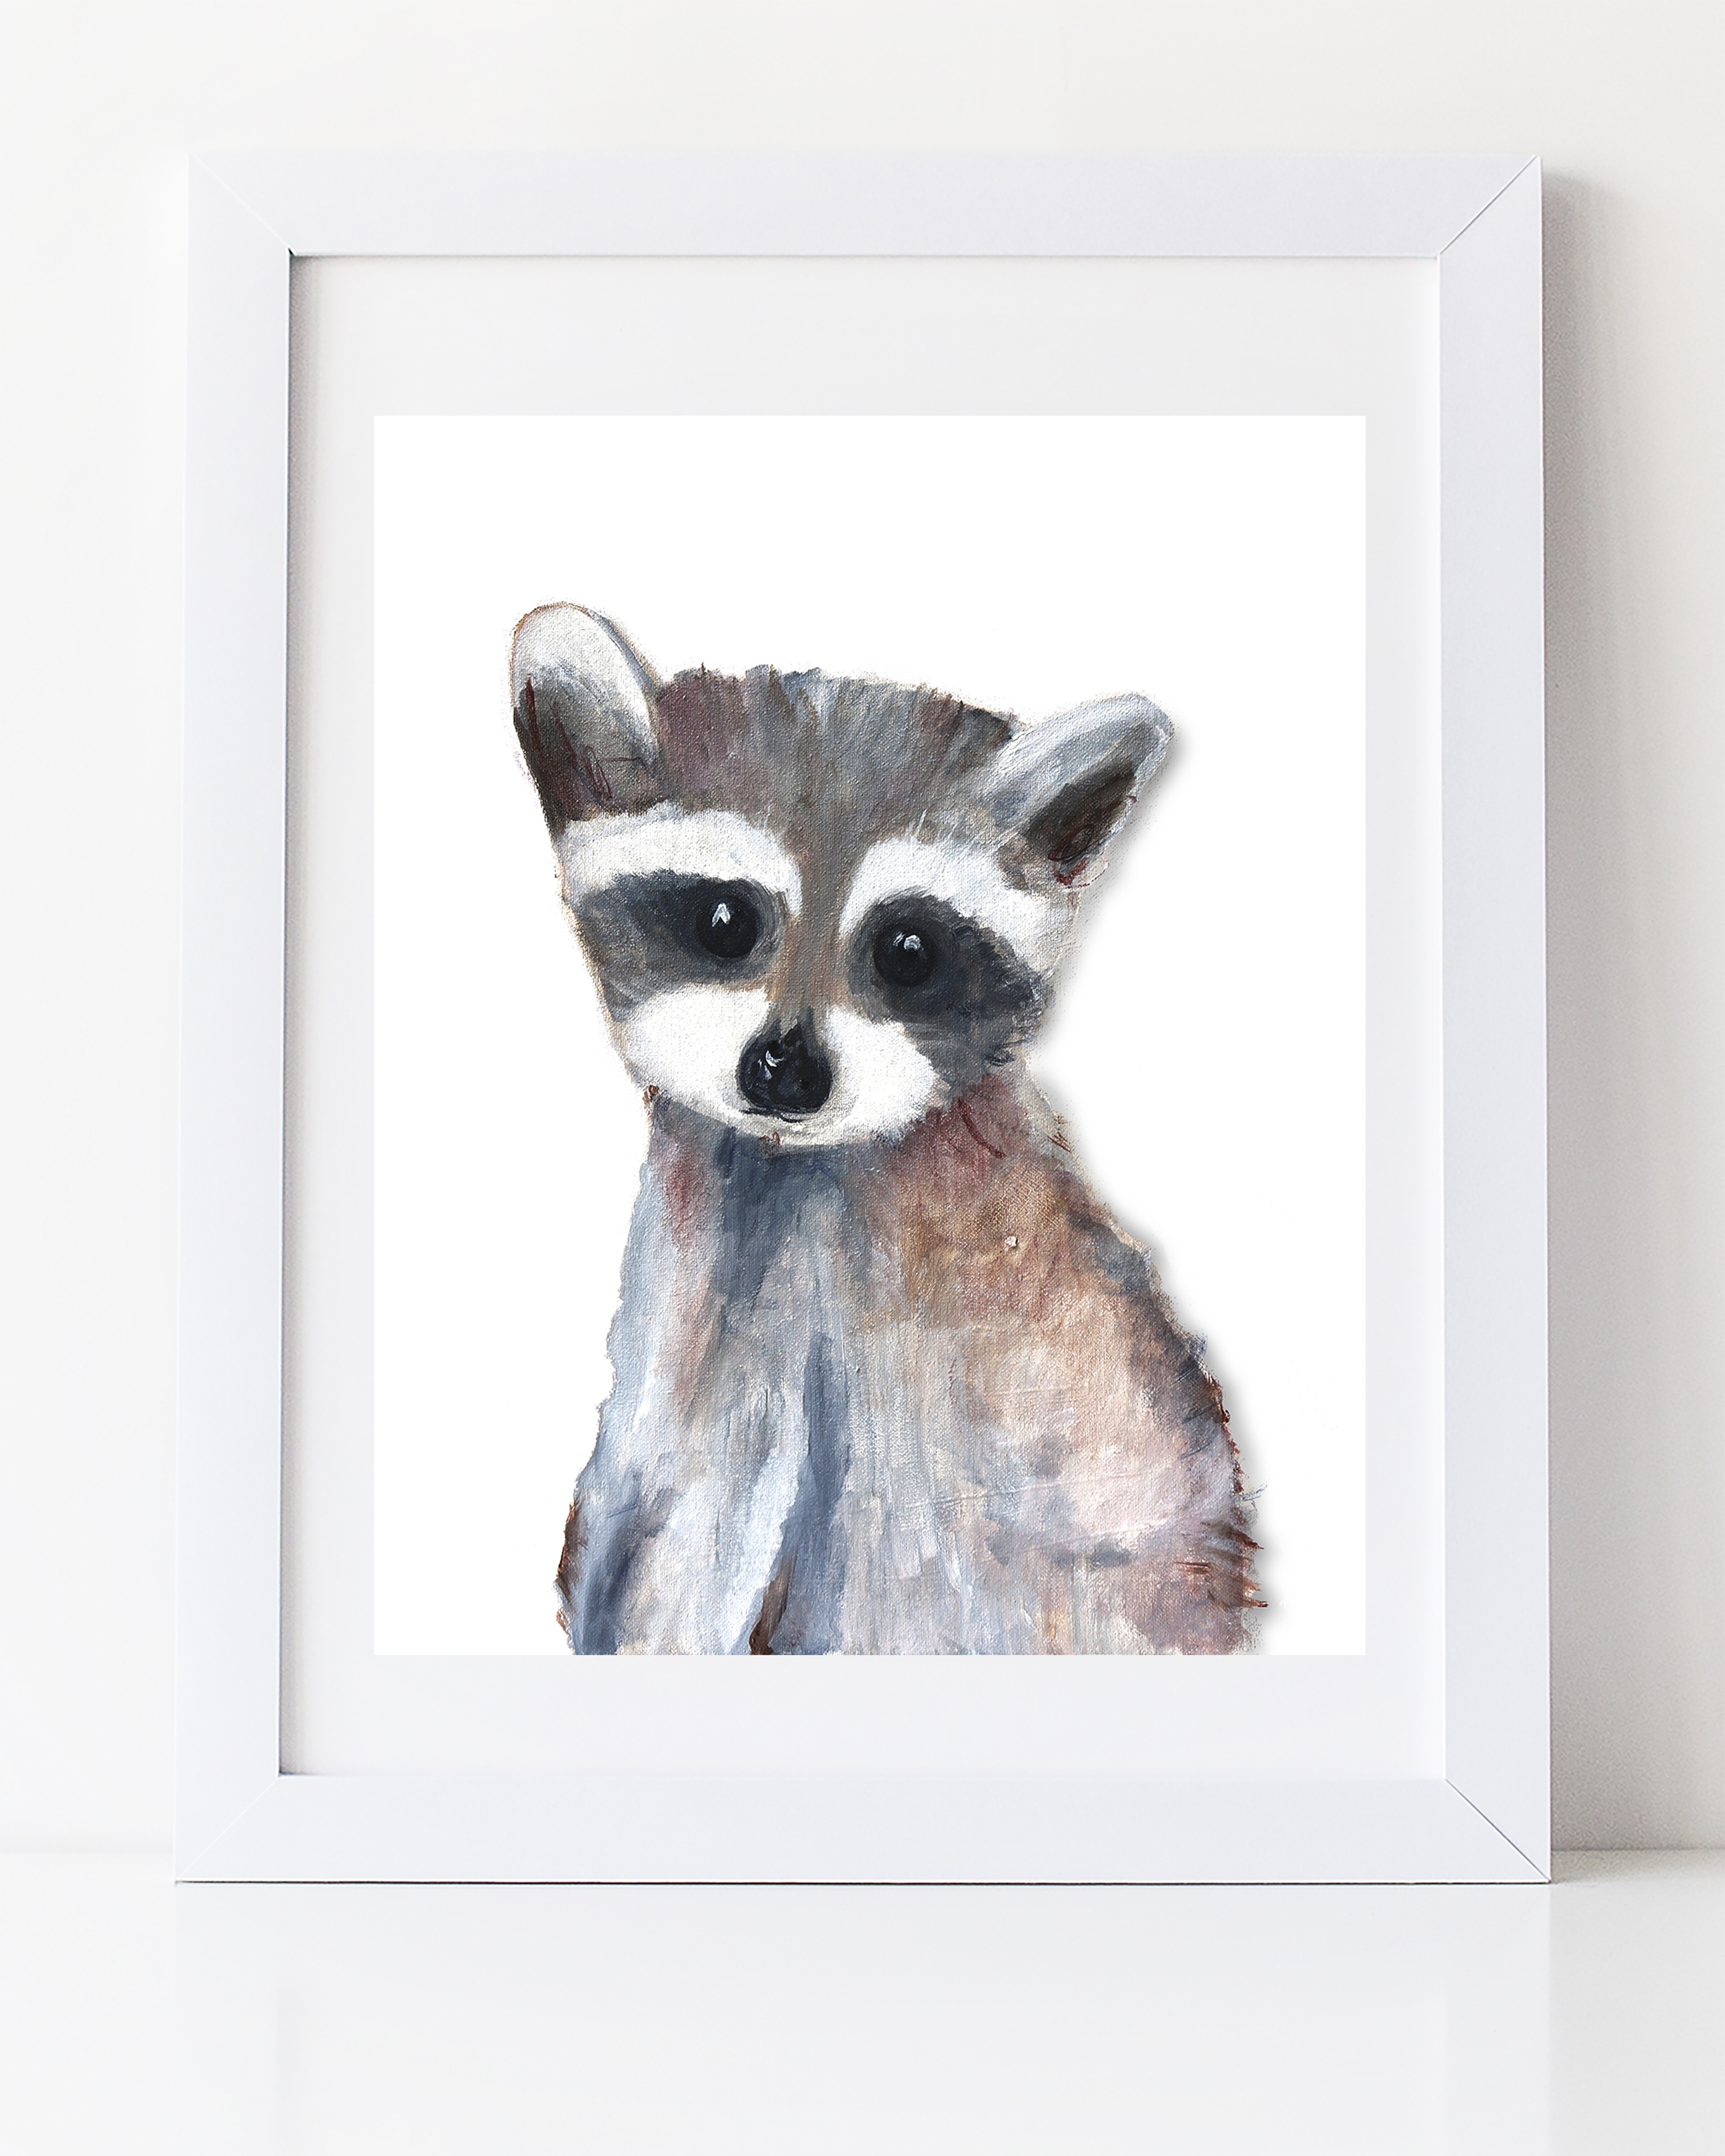 Pair of Racoon Wildlife Baby Animal Wall Decor Picture 8x10